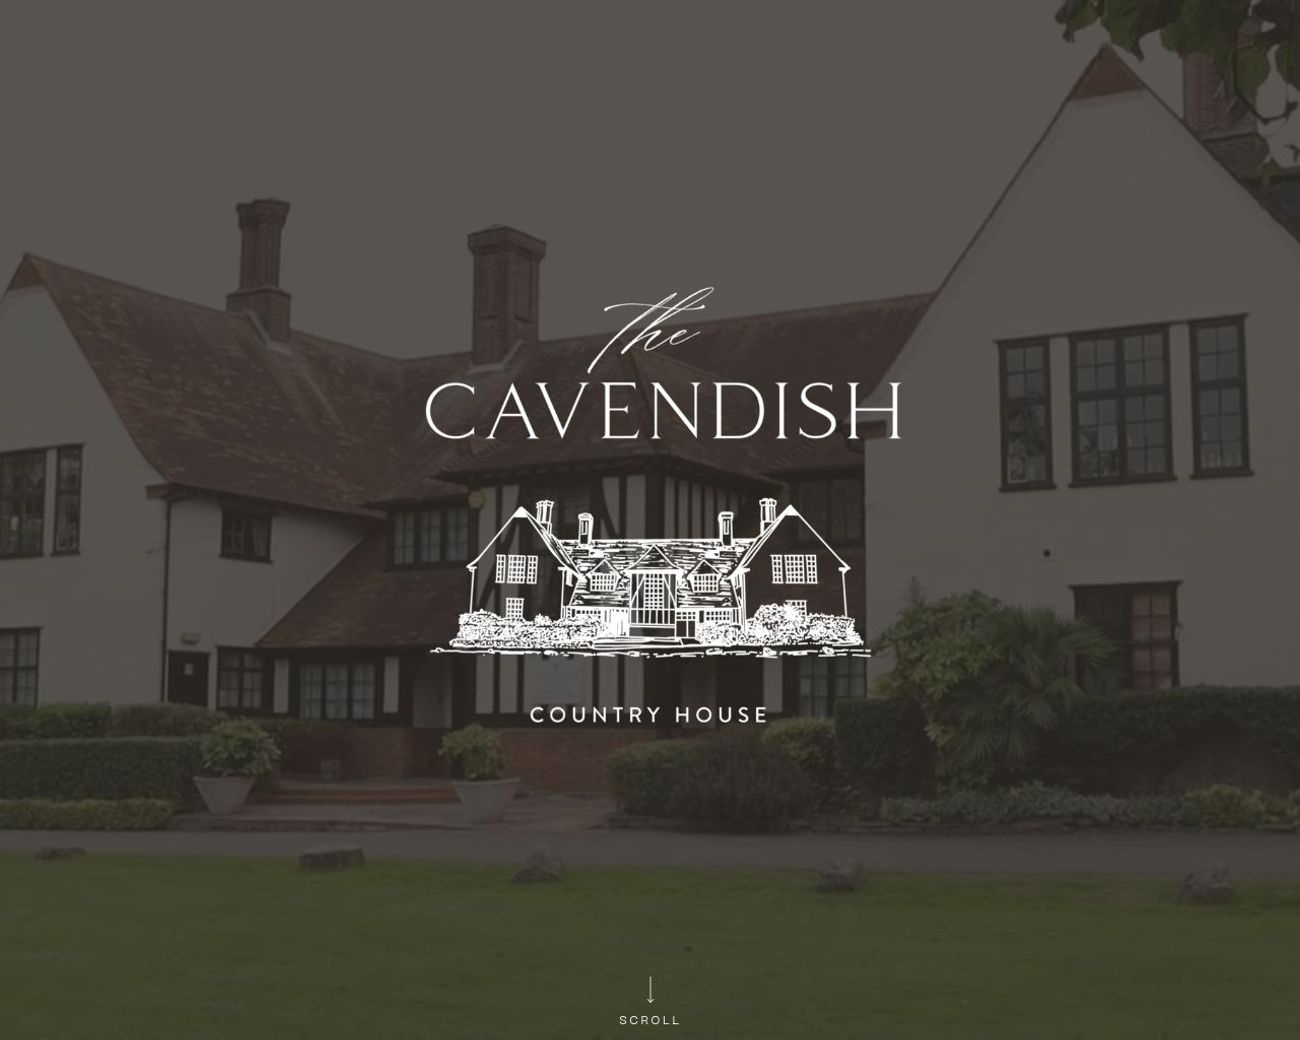 The Cavendish Country House